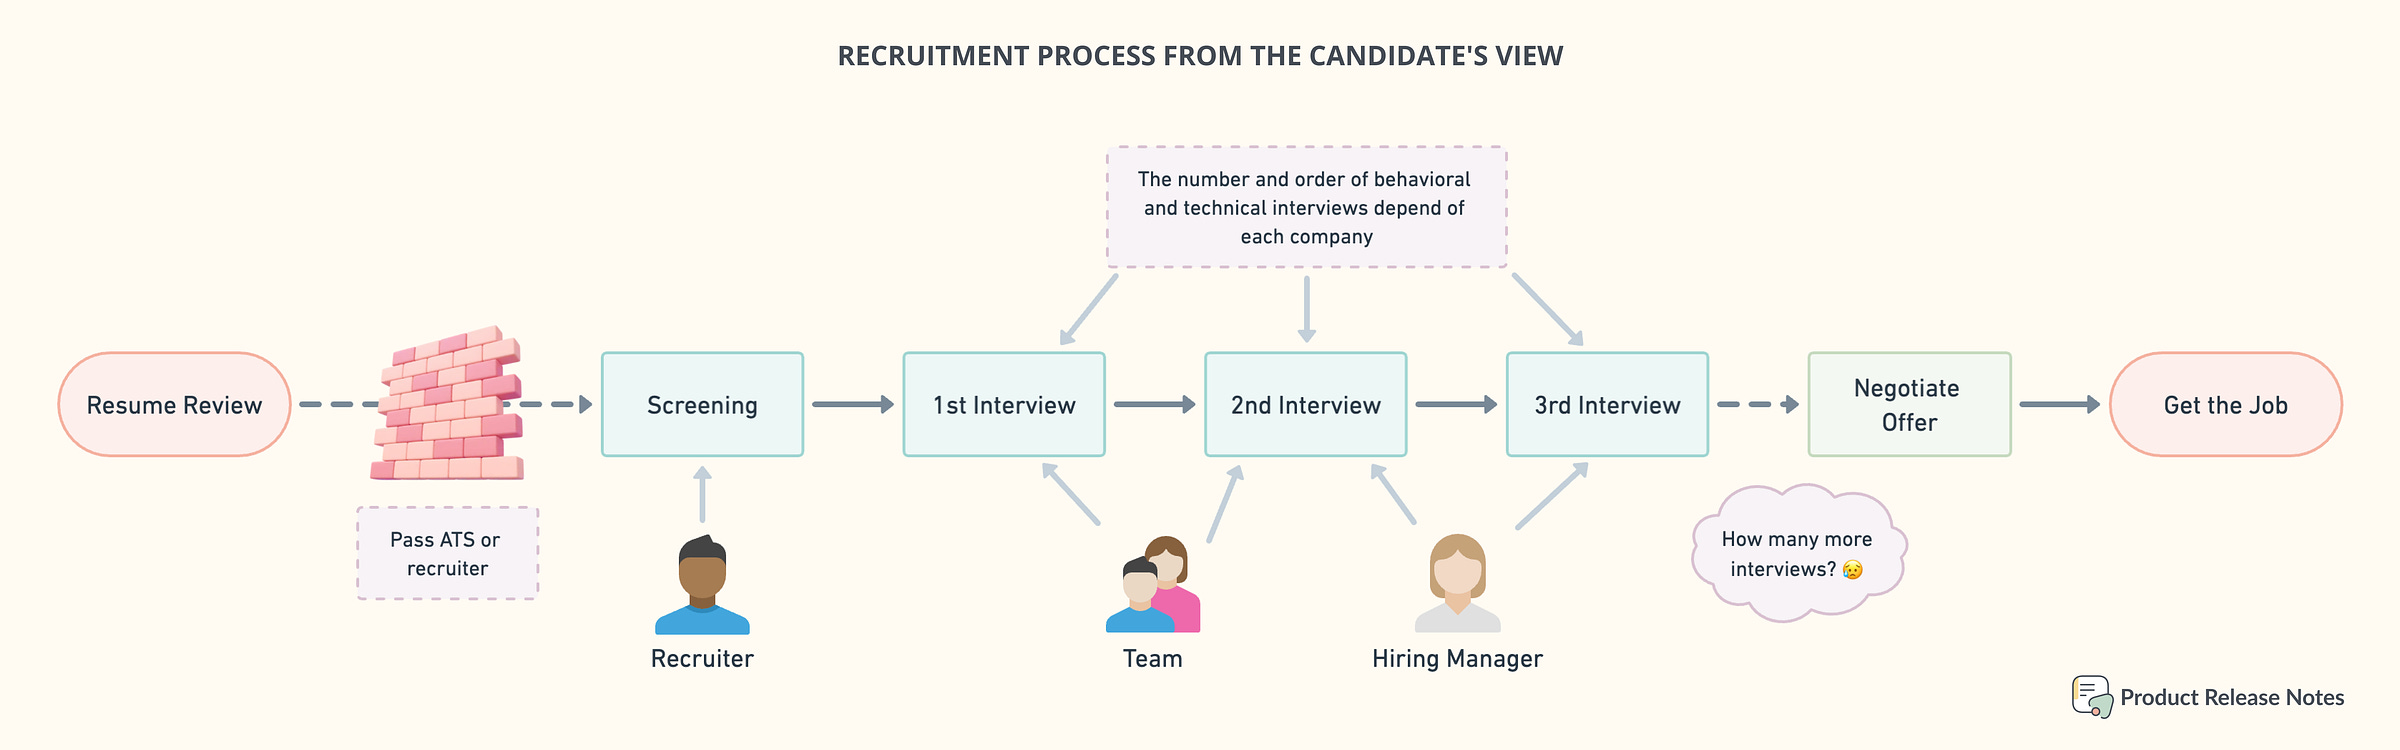 Recruitment process from the candidate view